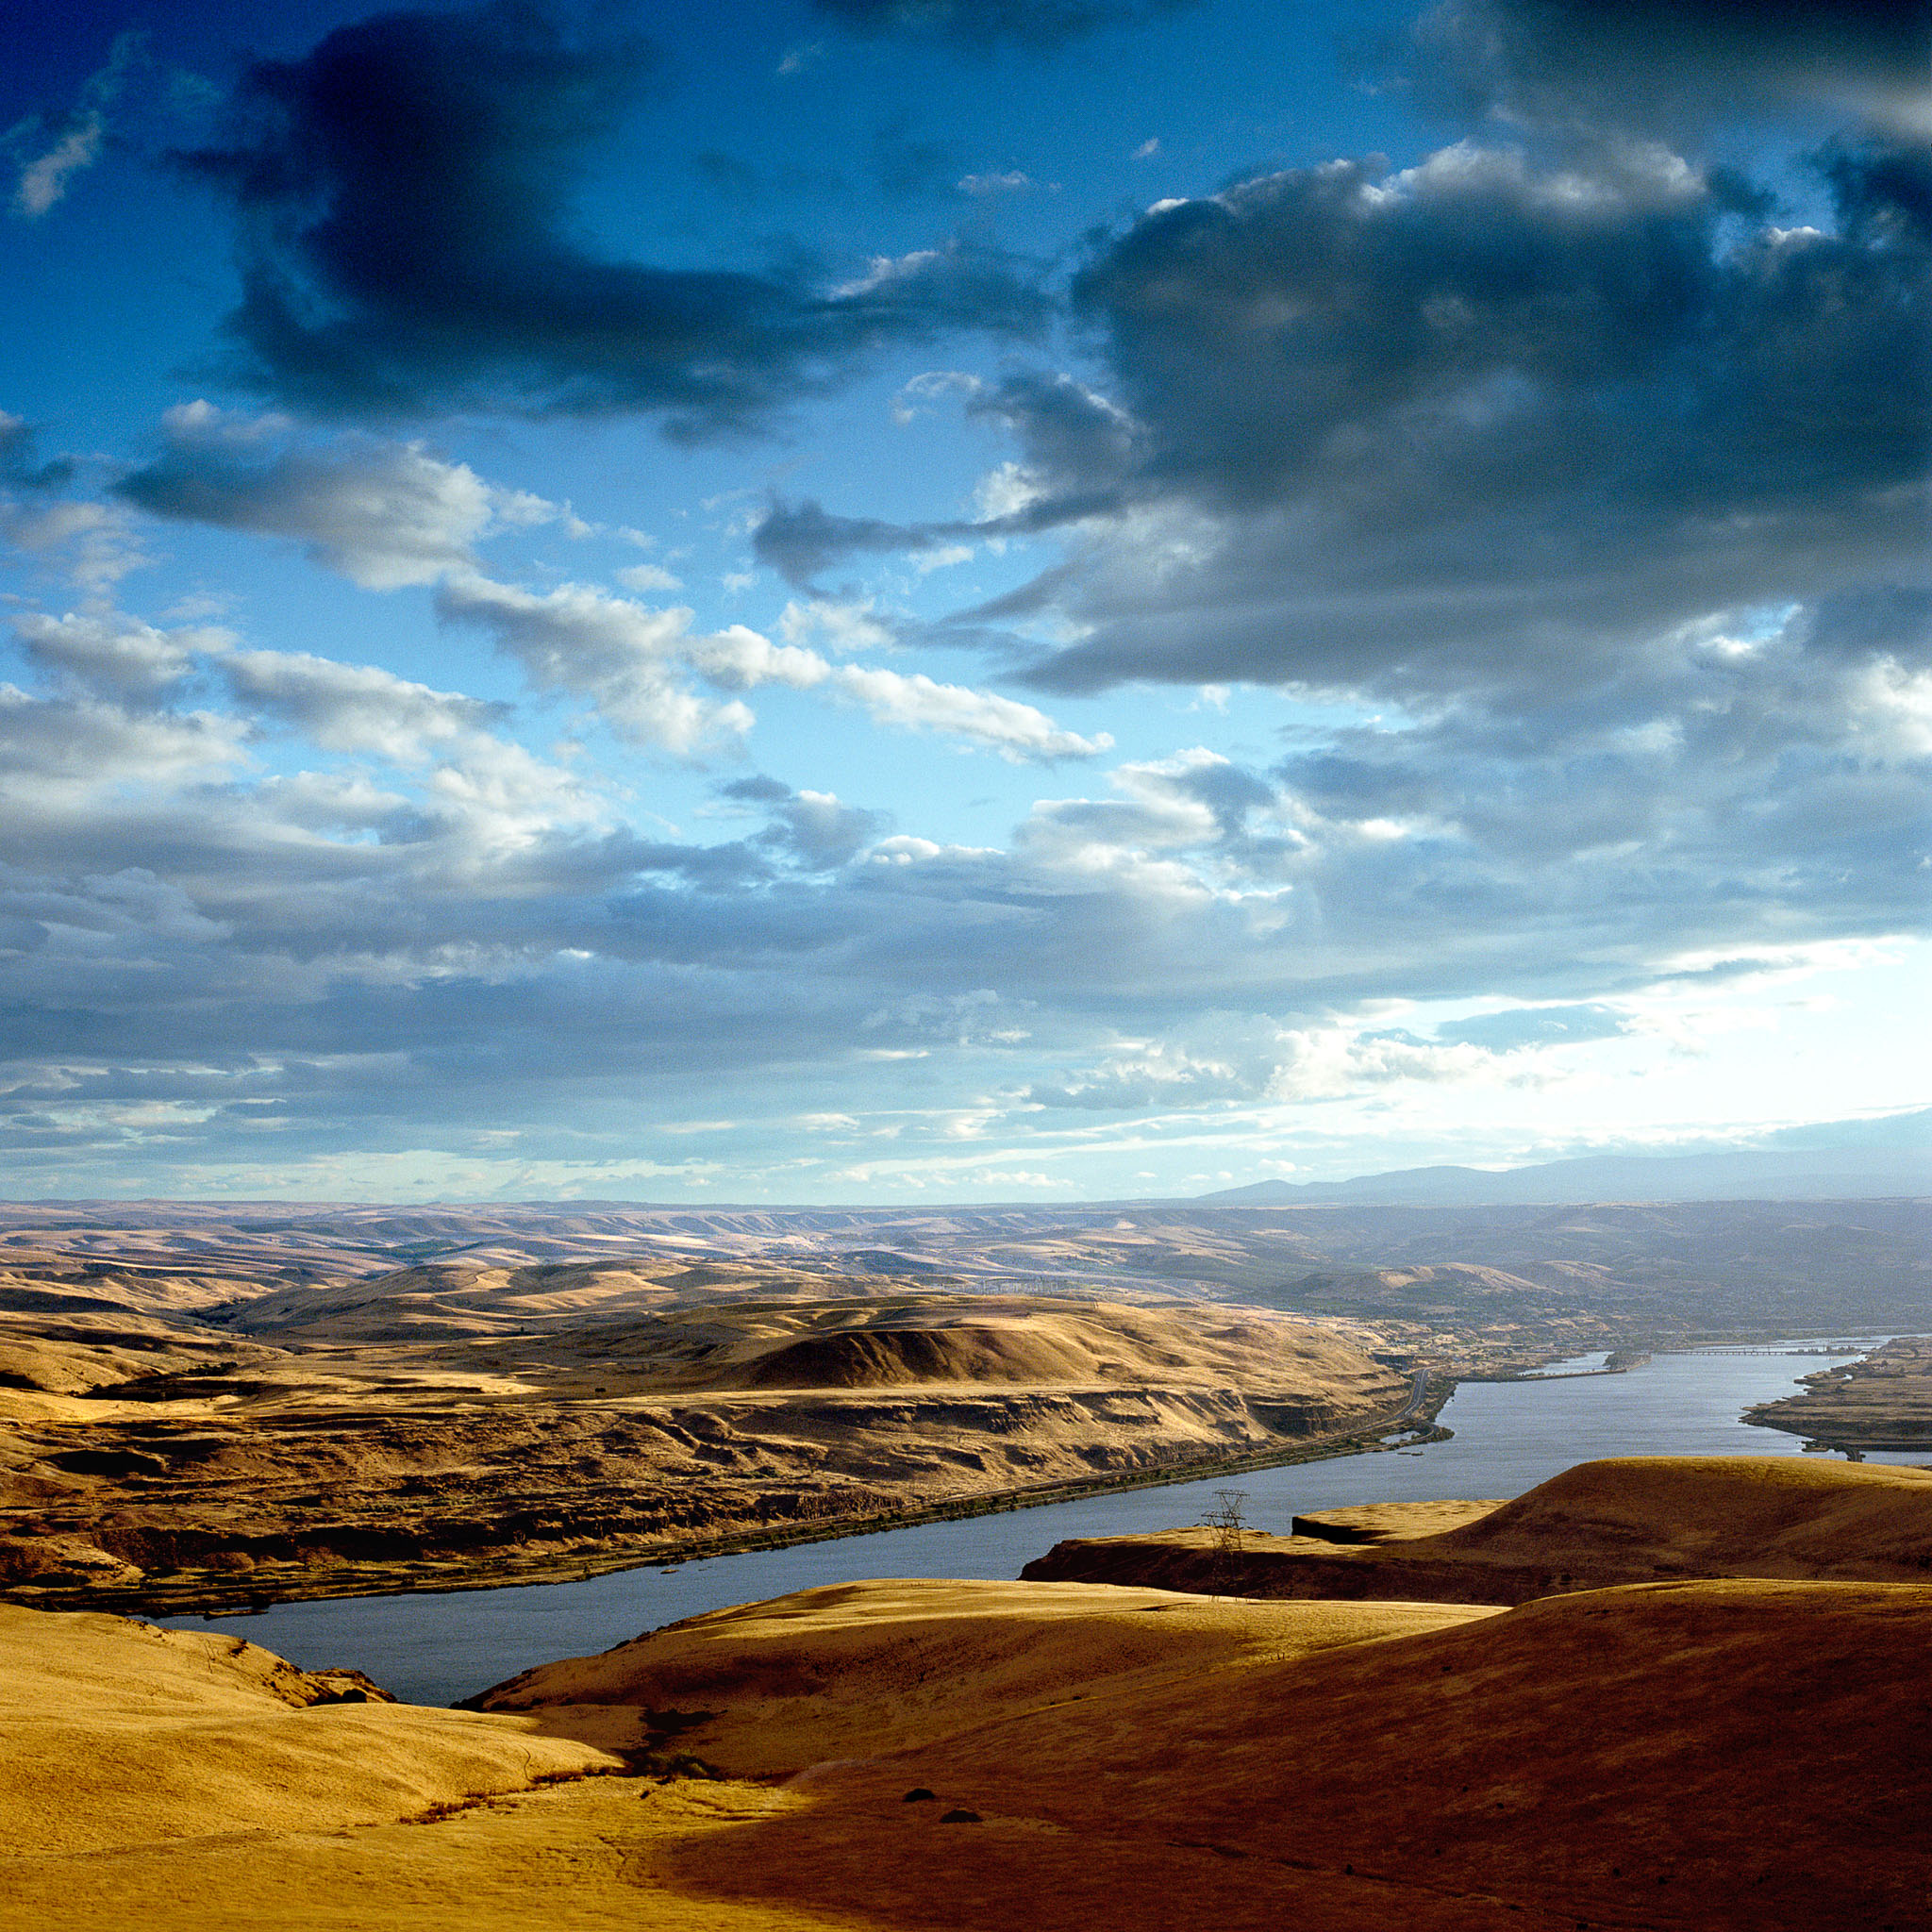 dalles-autumn-overlook-from-dalles-mnt-road-columbia-river-gorge-wa-8x8.jpg